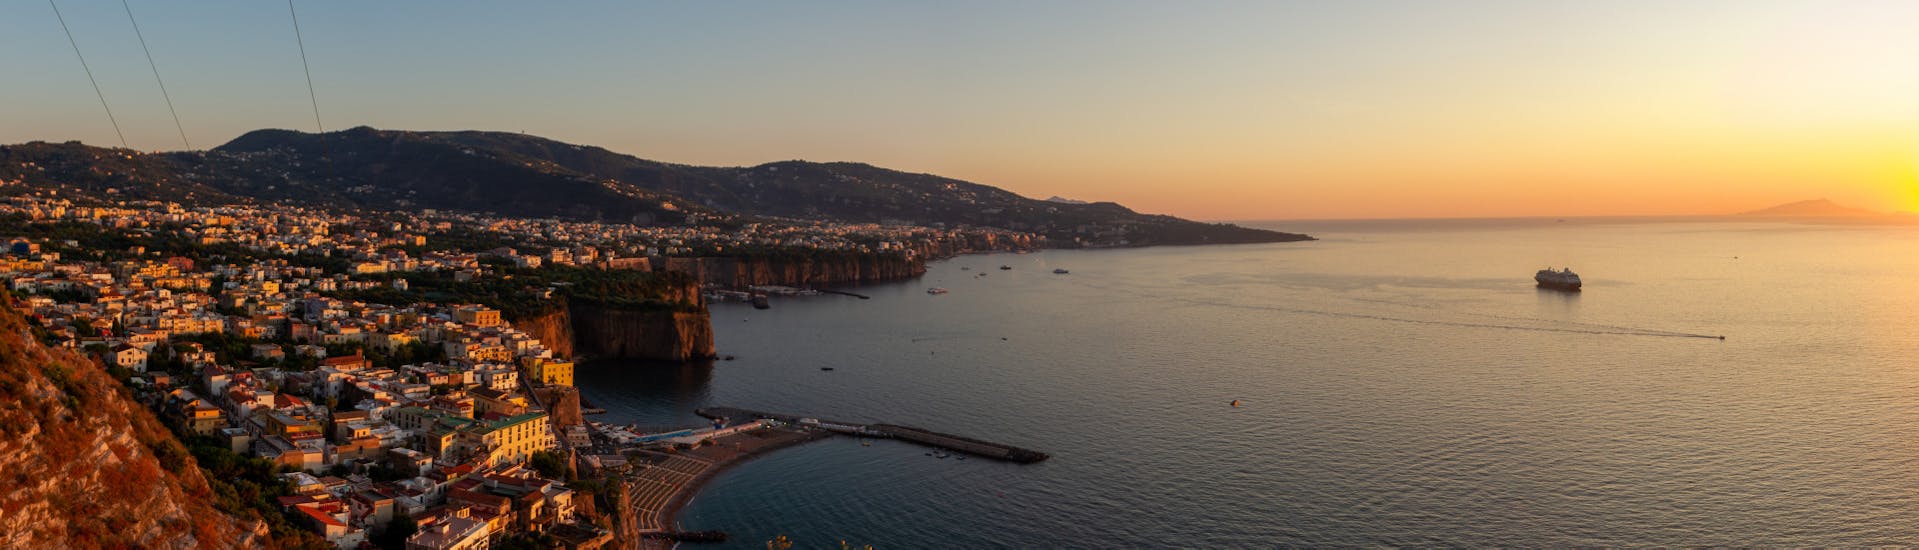 View of the Sorrento Bay where the trips organized by Tours & More Italia start.